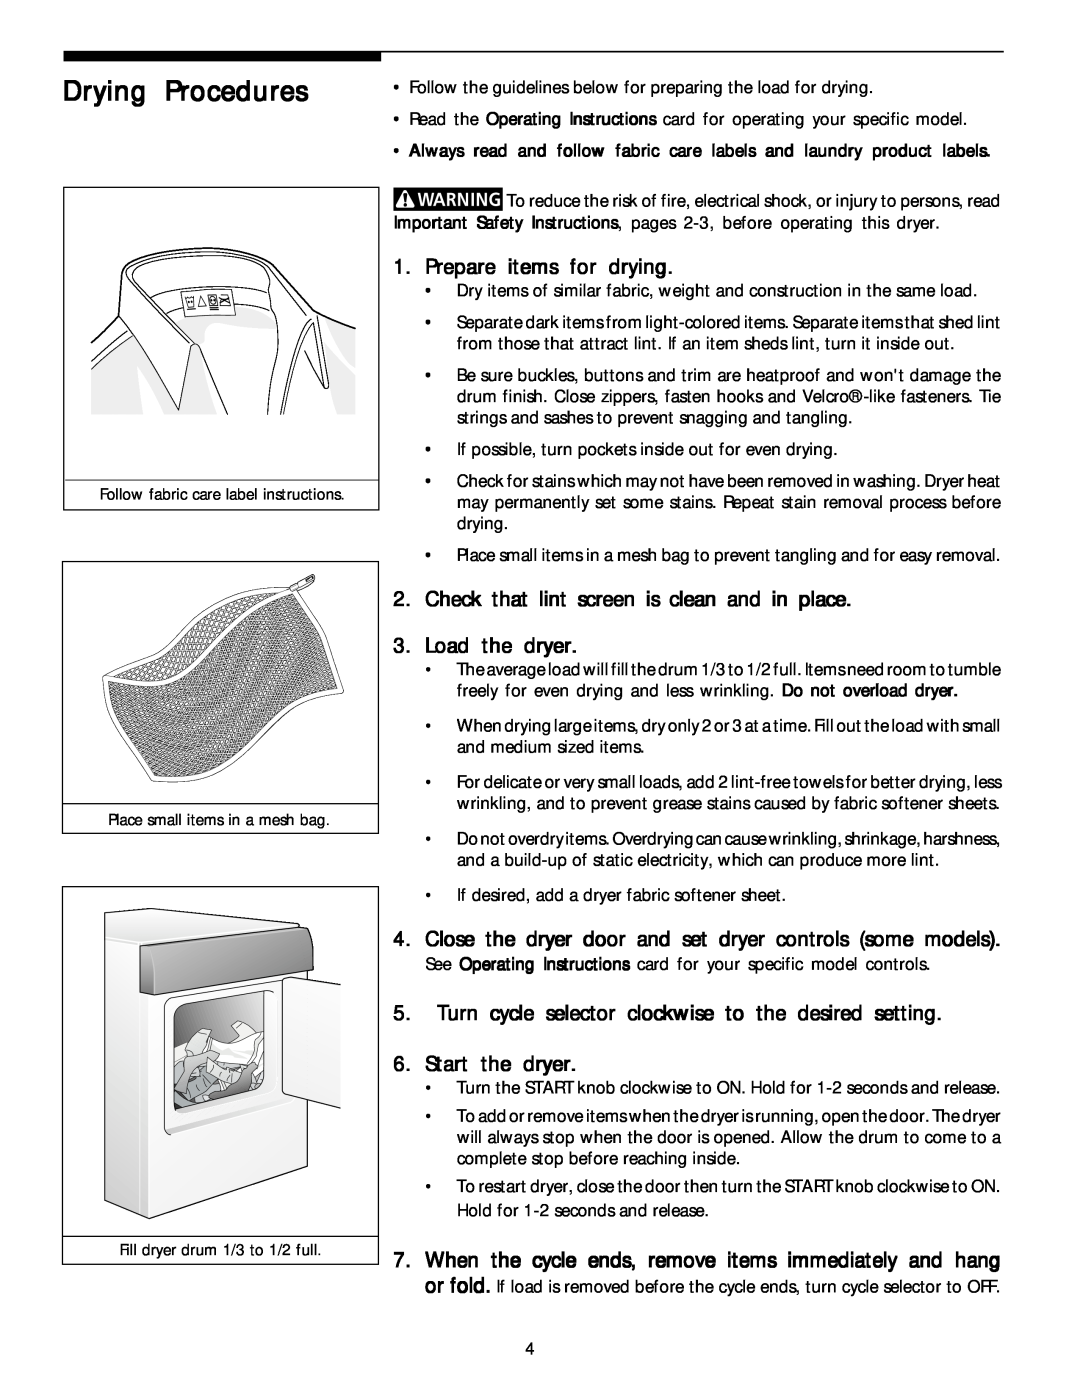 Electrolux - Gibson Stackable Dryer manual Drying Procedures, Prepare items for drying, Start the dryer 